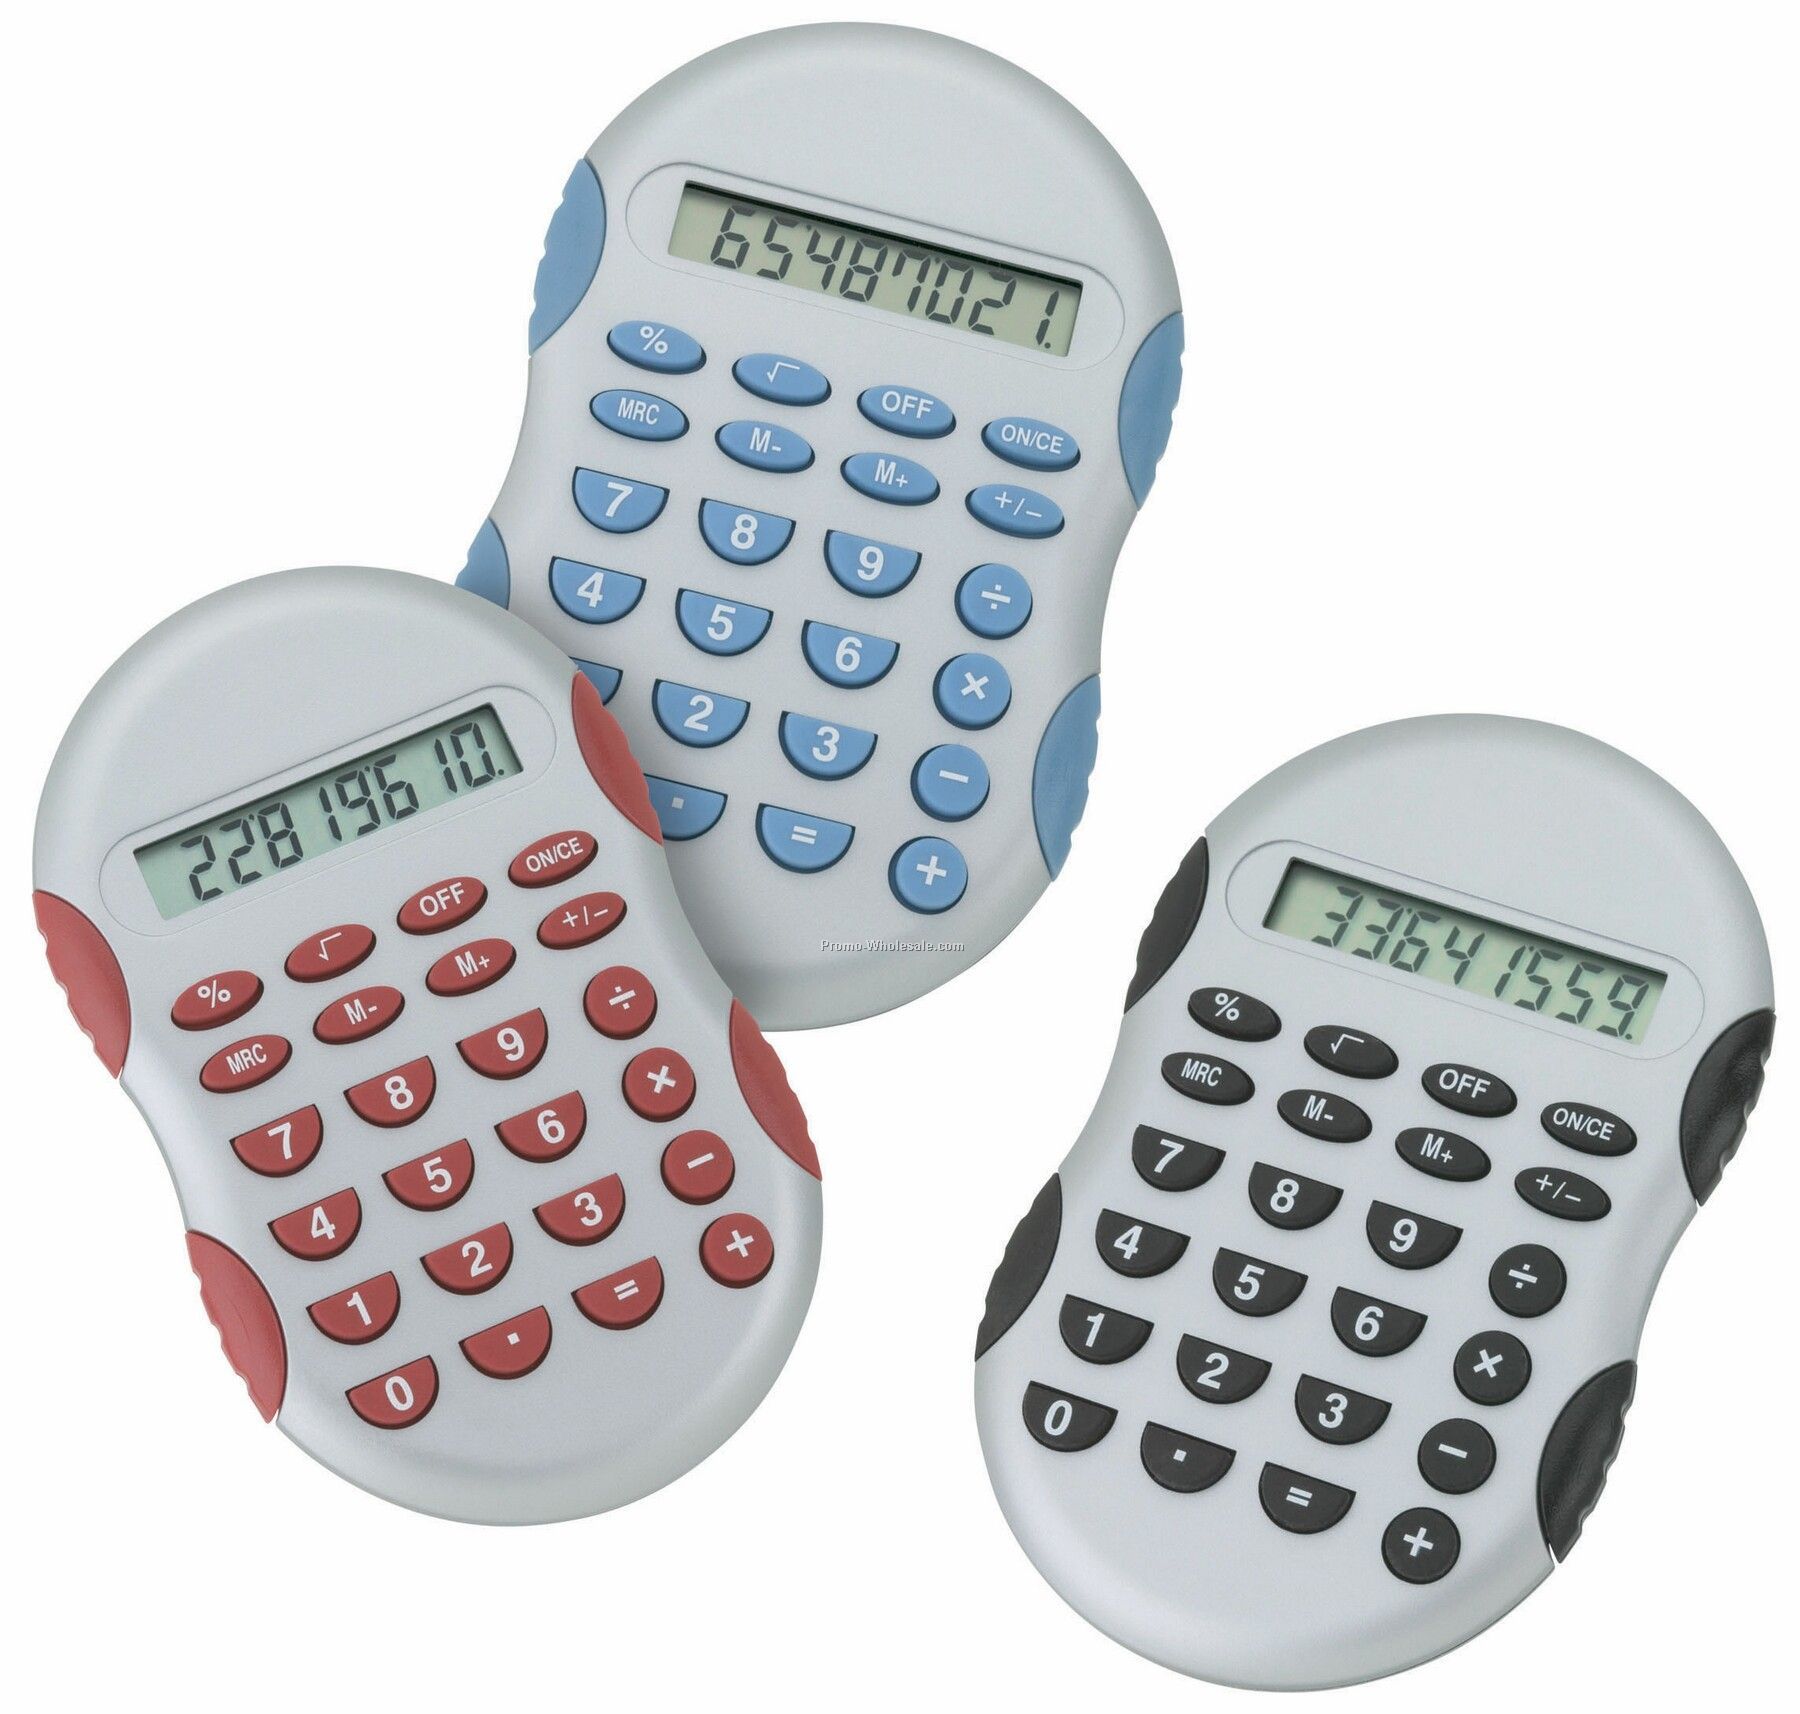 Giftcor Collection Black Comfort Calculator 4-1/2"x2-3/4"